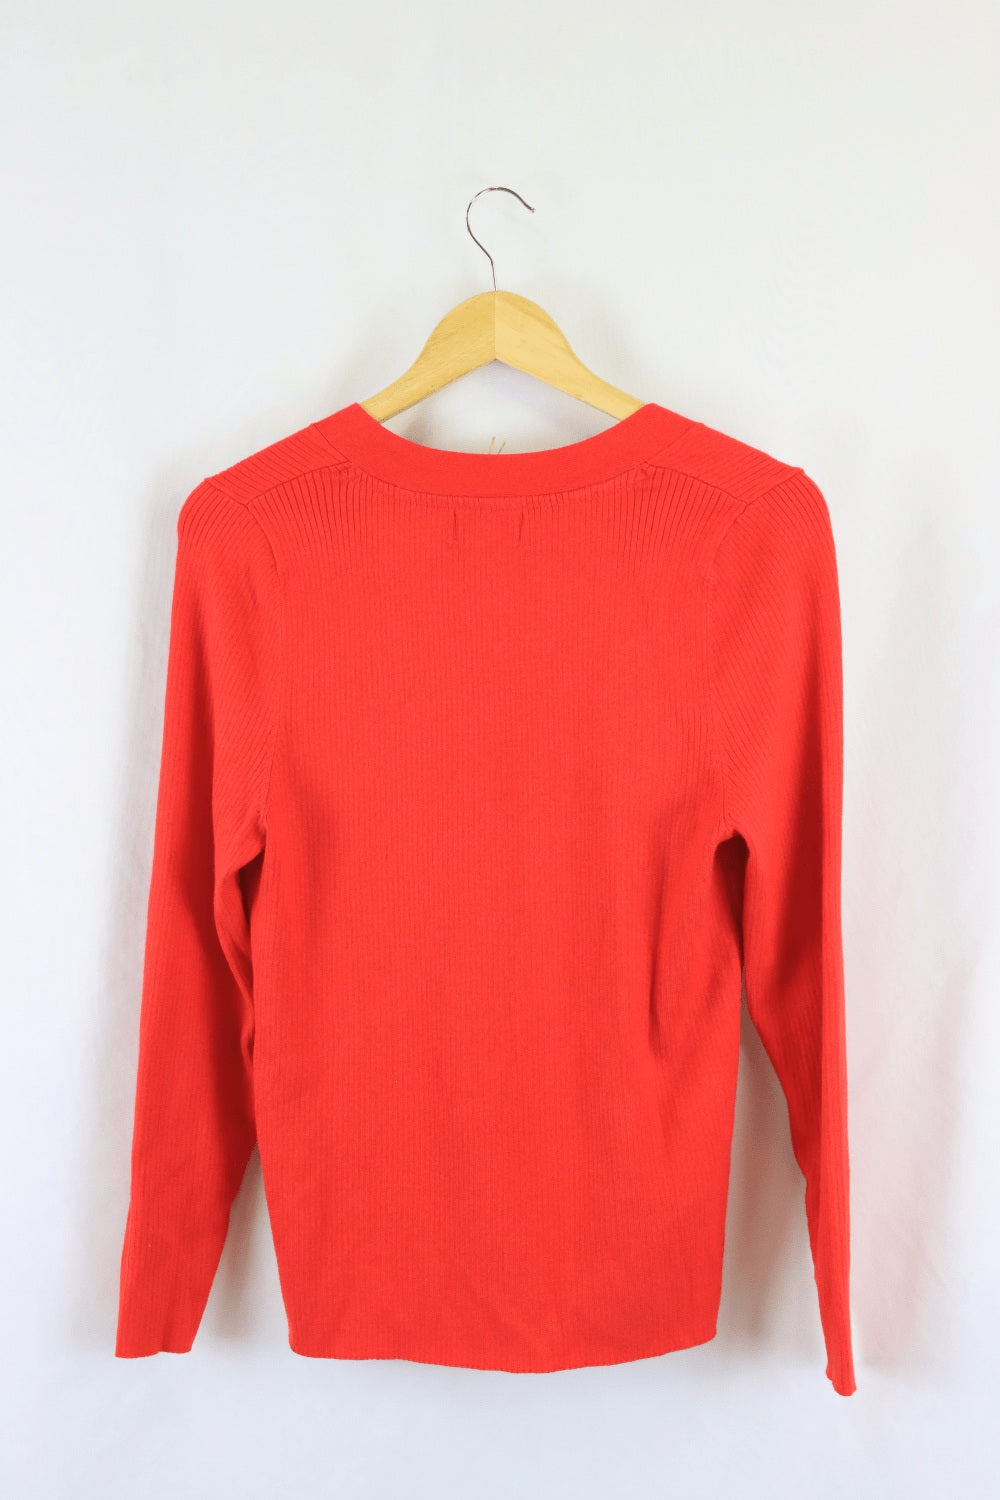 Maeve By Anthropology Red Knit Jumper 1 X